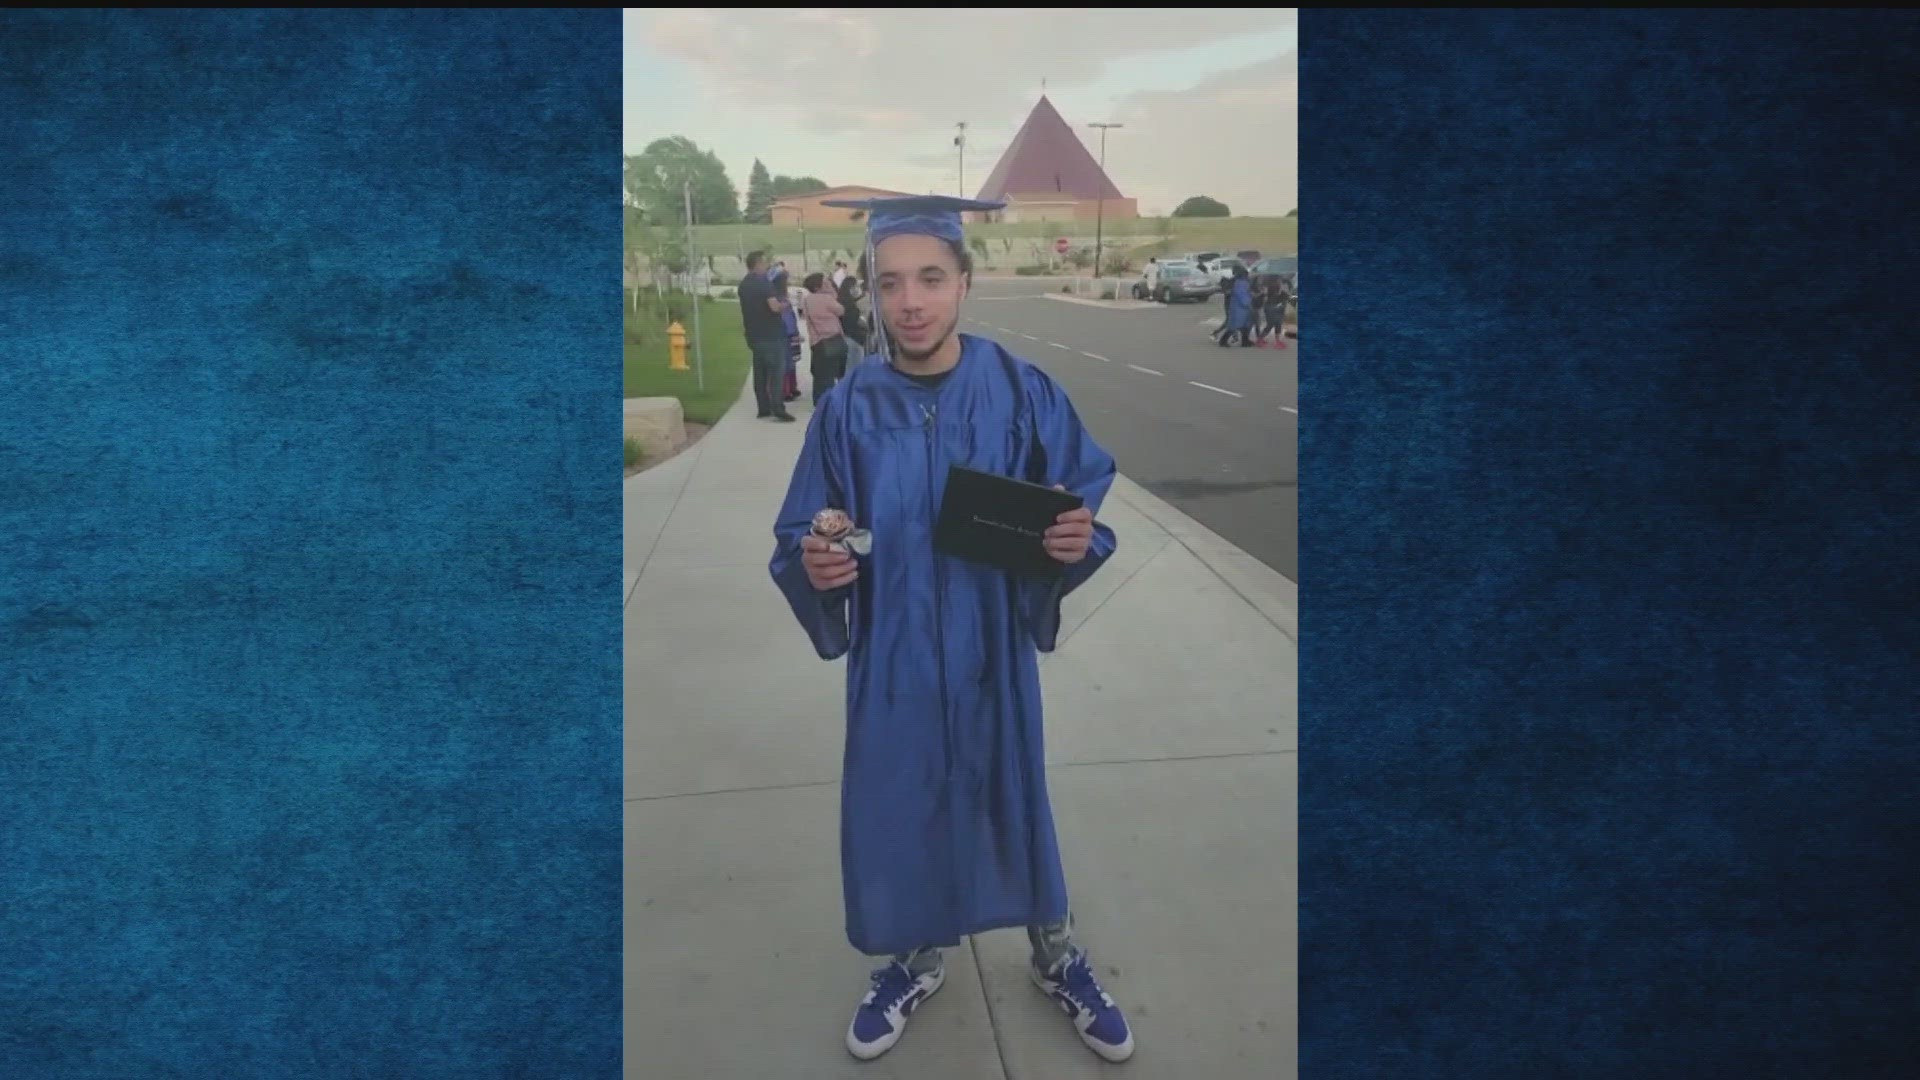 Police say 19-year-old Reese Crenshaw was shot and killed at a birthday party just hours after graduating high school.